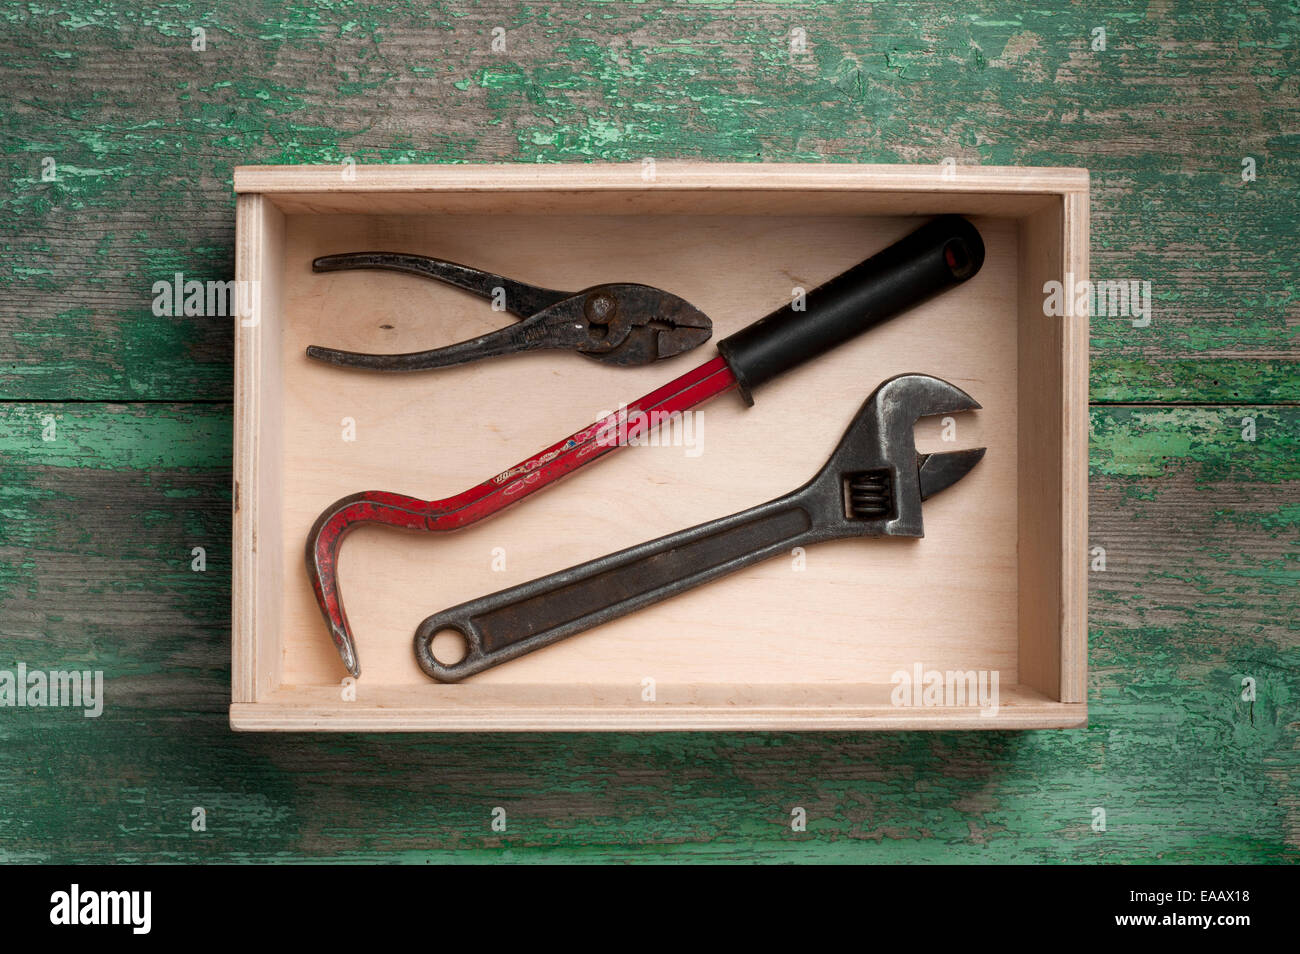 Wooden box with tools close up Stock Photo